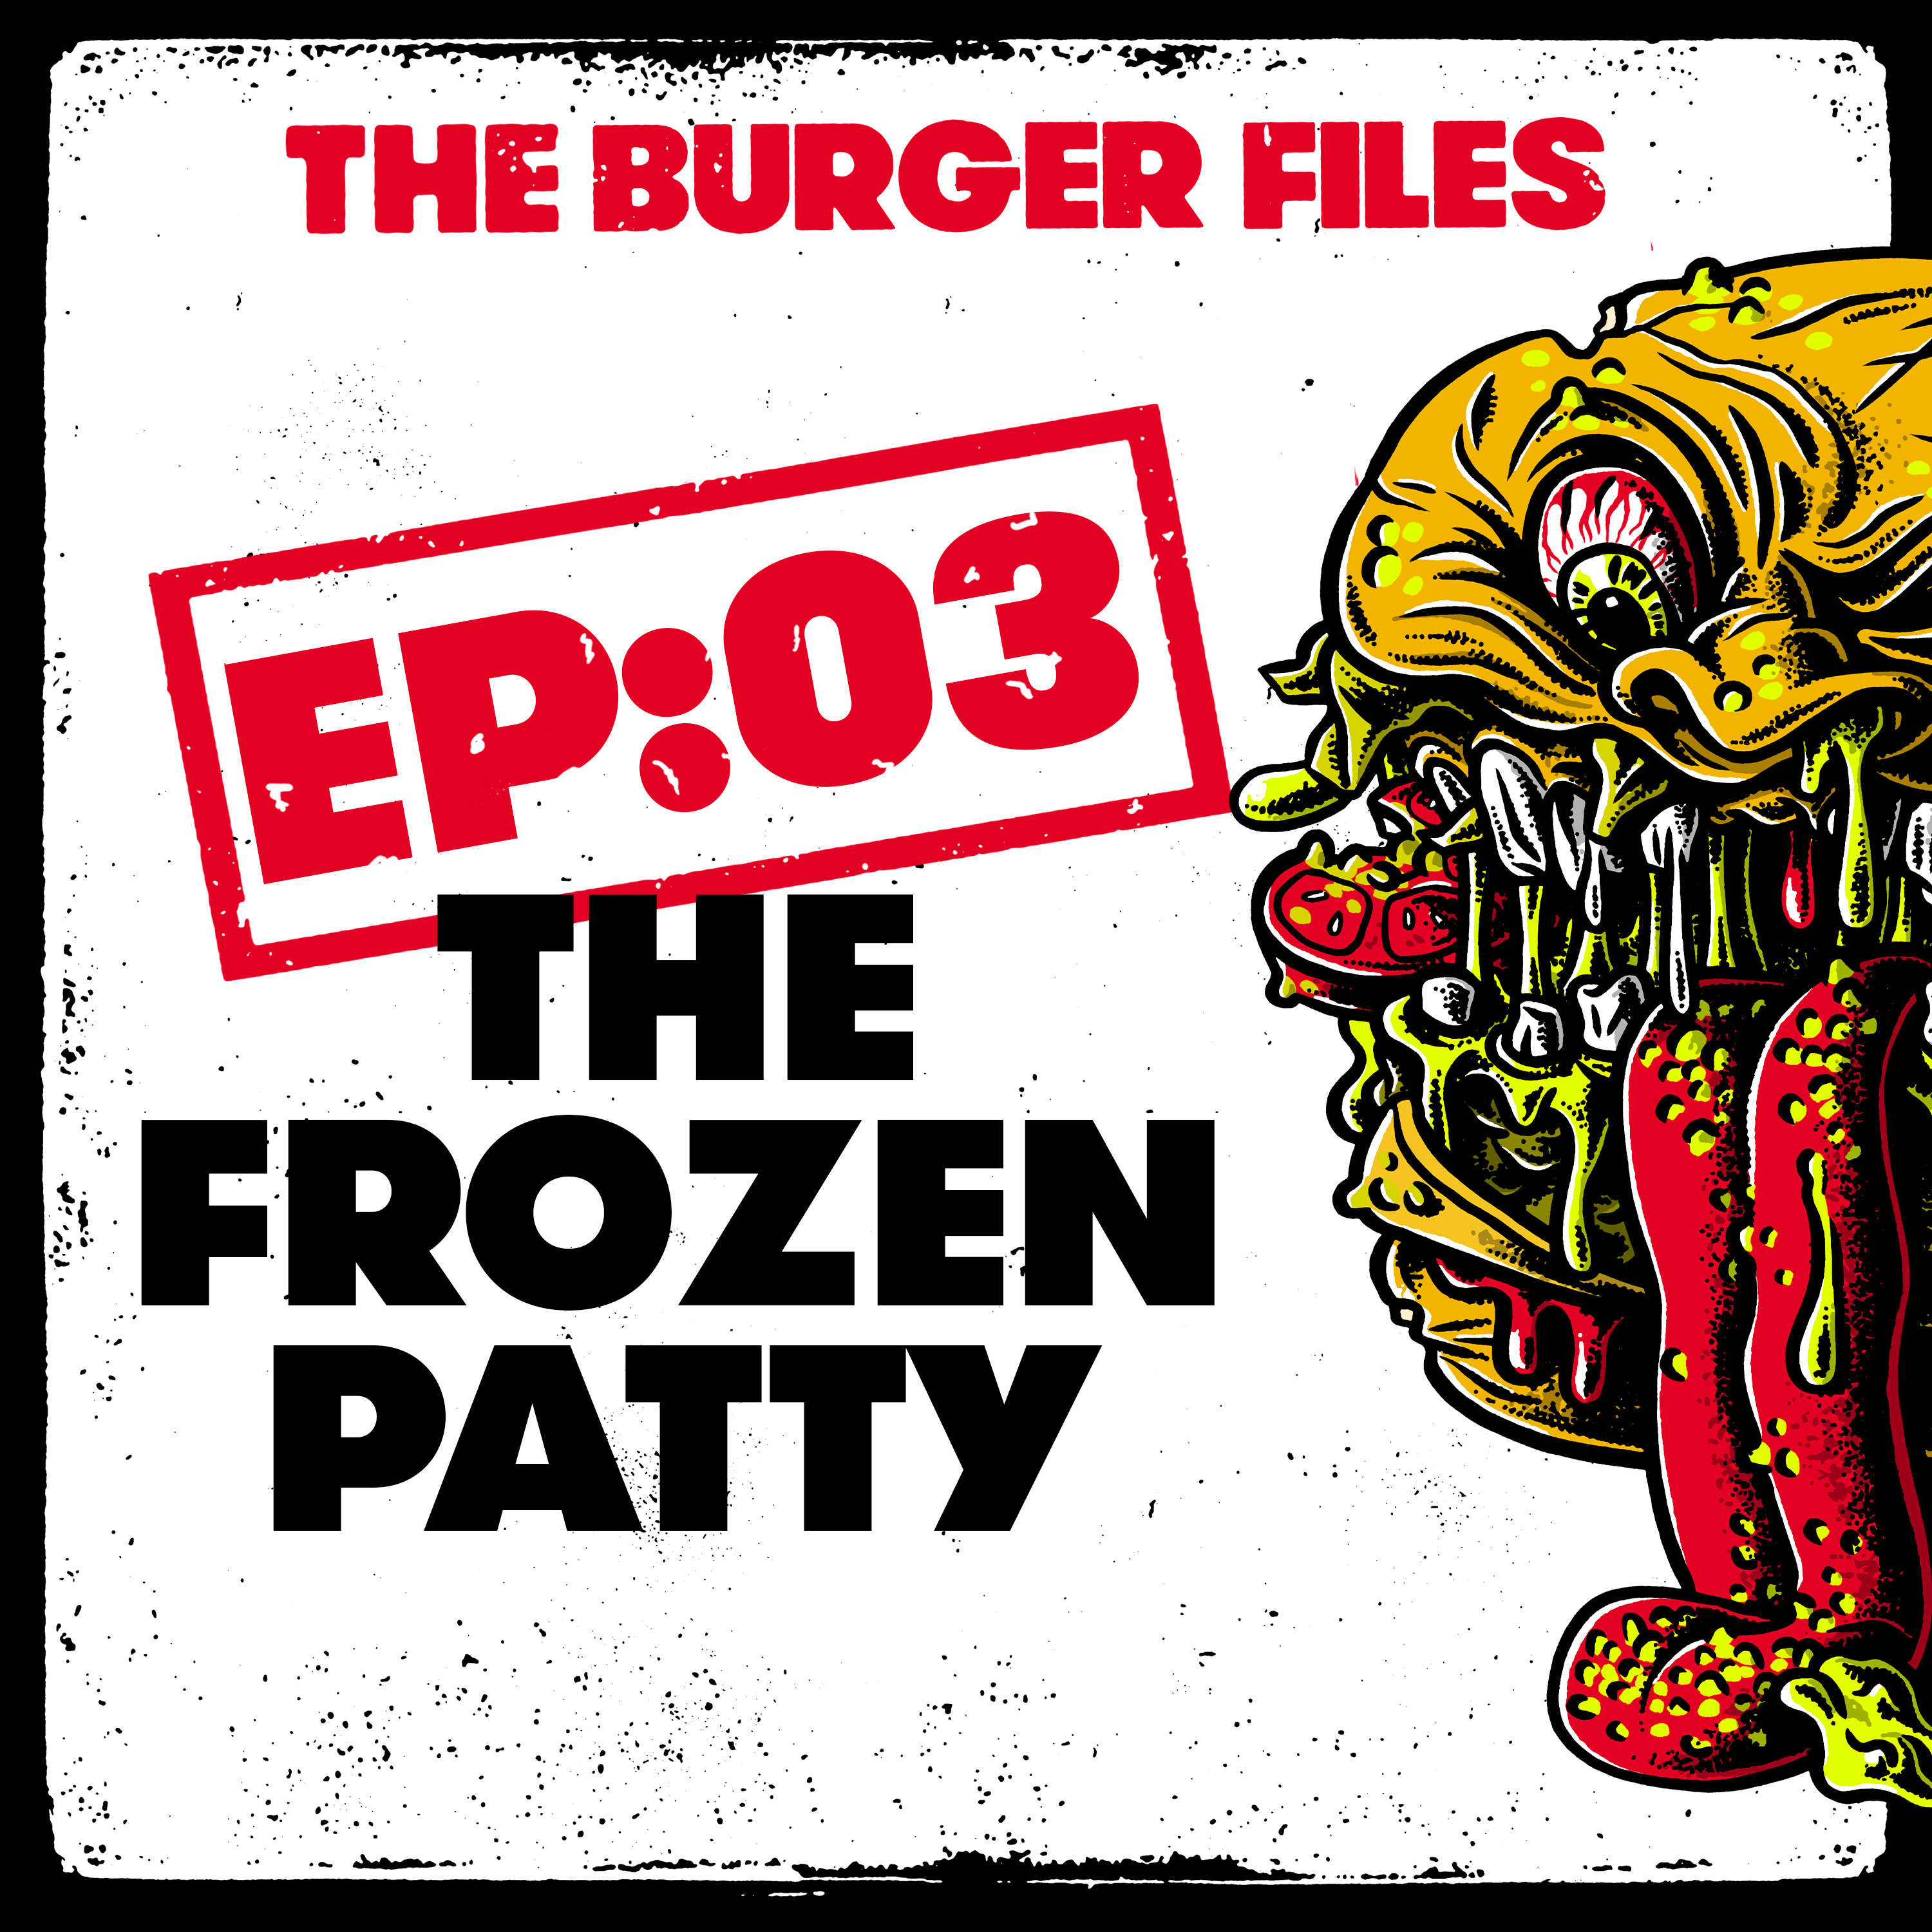 EP:03 - The Frozen Patty